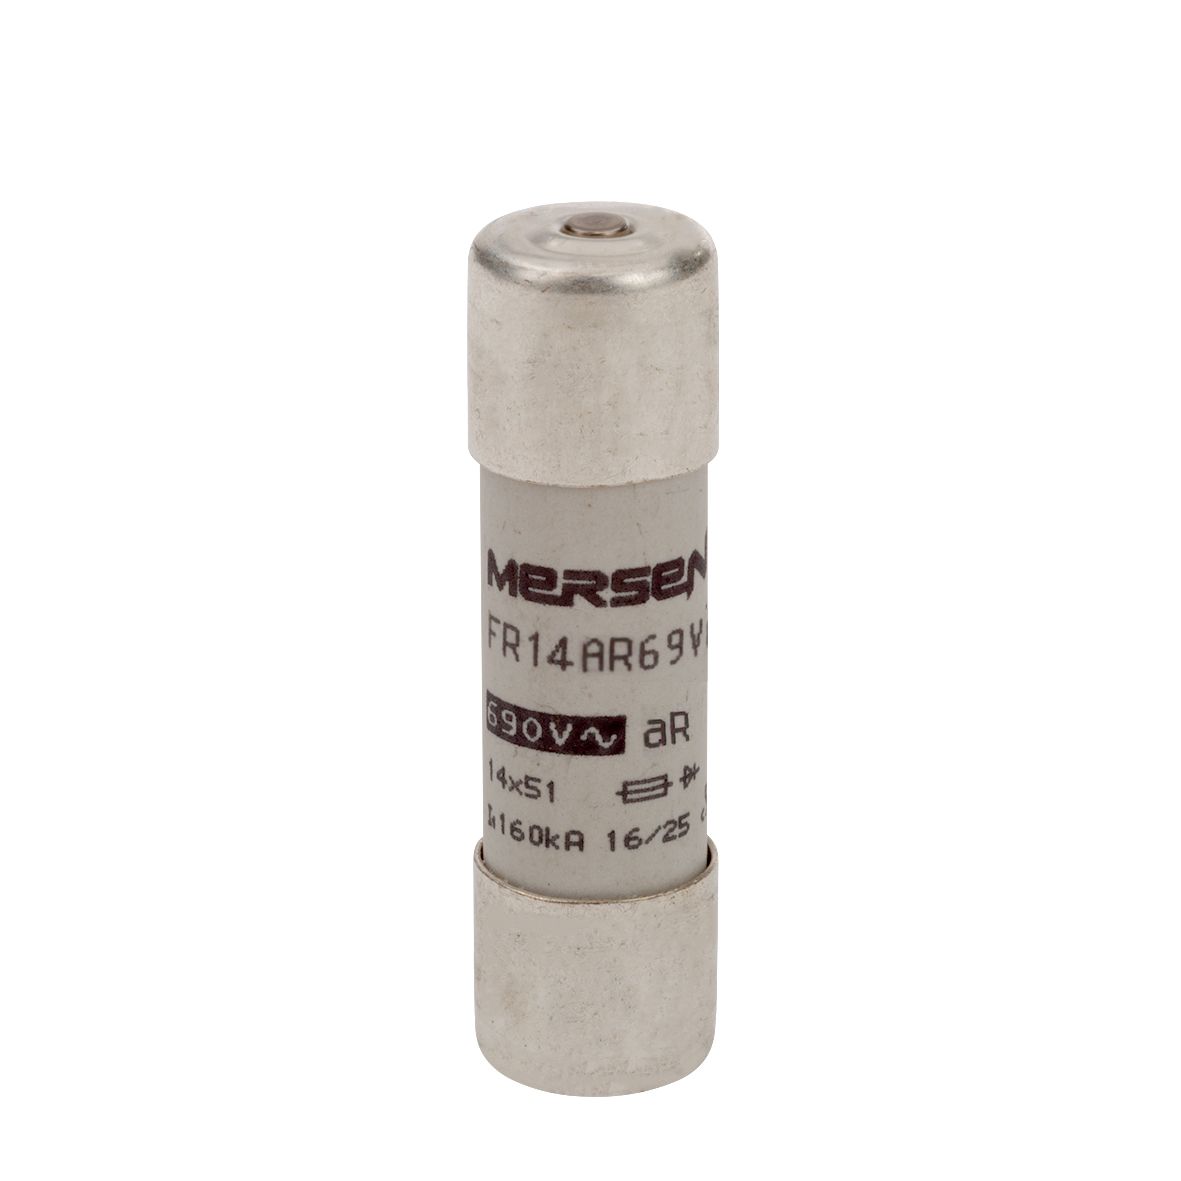 Q1056657 - Cylindrical fuse-link aR 690VAC 14x51, 8A, with indicator